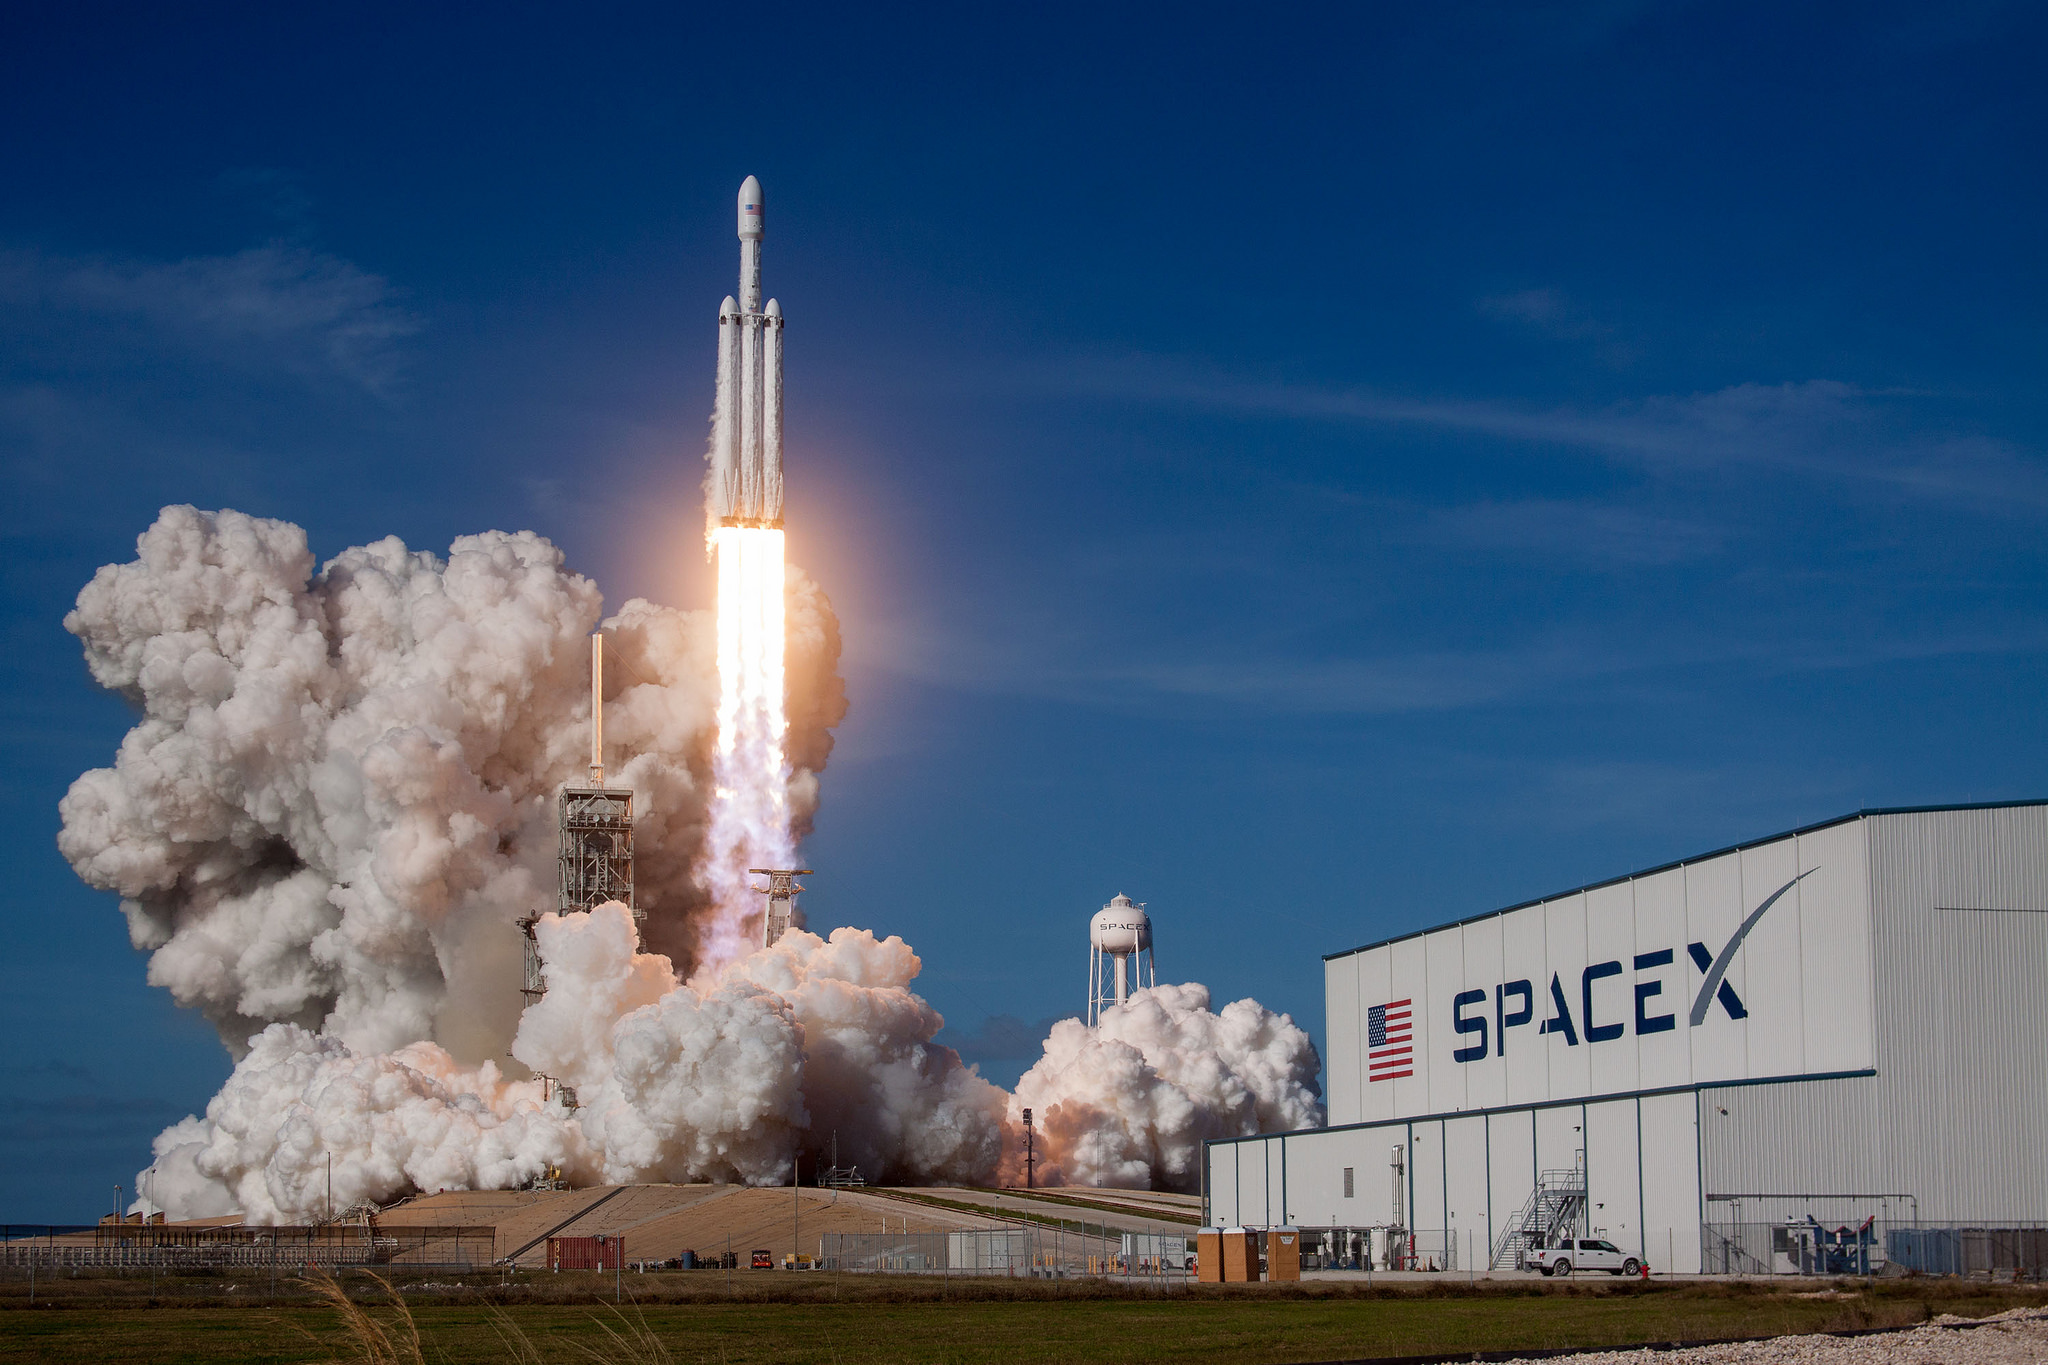 Kenya's first observation Taifa-1 satellite was successfully launched on Saturday aboard a SpaceX Falcon 9 rocket